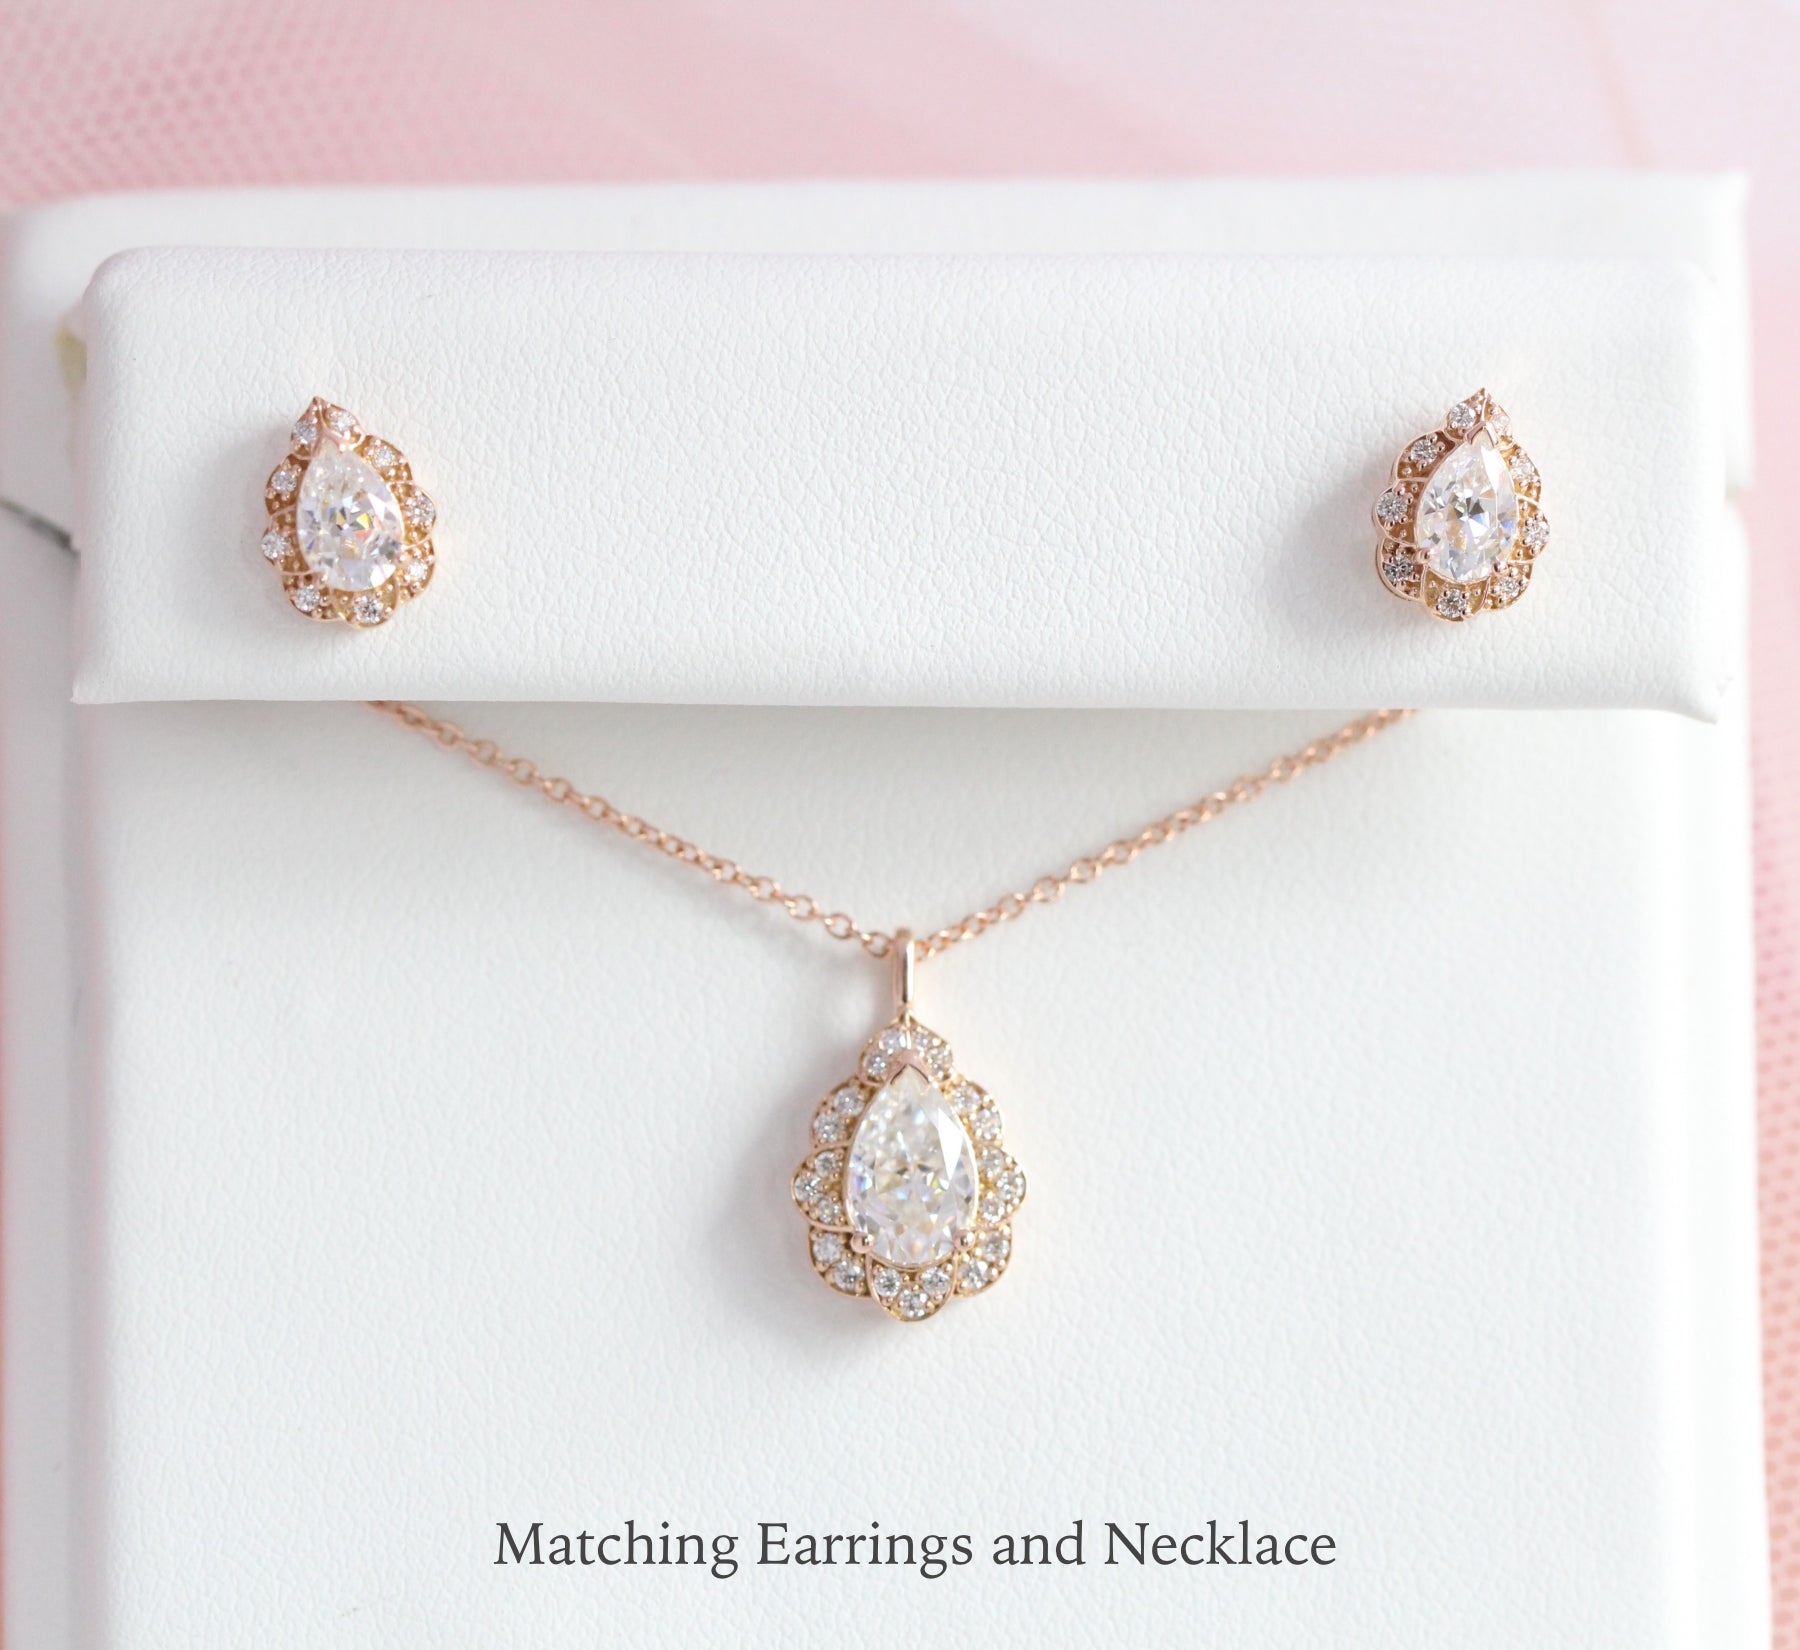 Matching Diamond Earrings and Necklace Rose Gold Wedding Jewelry Set La More Design jewelry